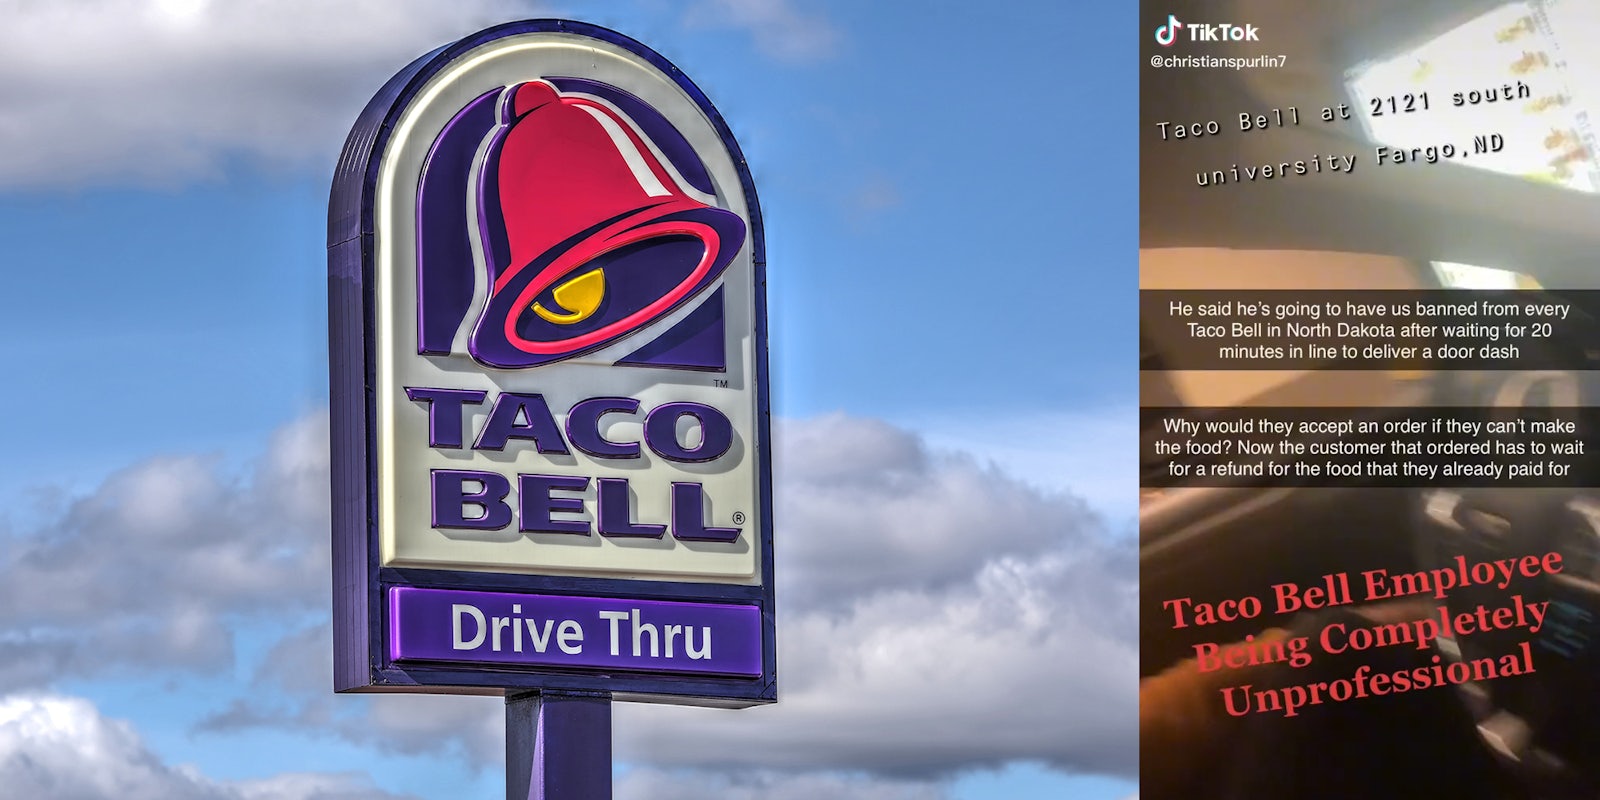 Taco Bell drive thru sign (l) person in car with caption 'Taco Bell Employee Being Completely Unprofessional'